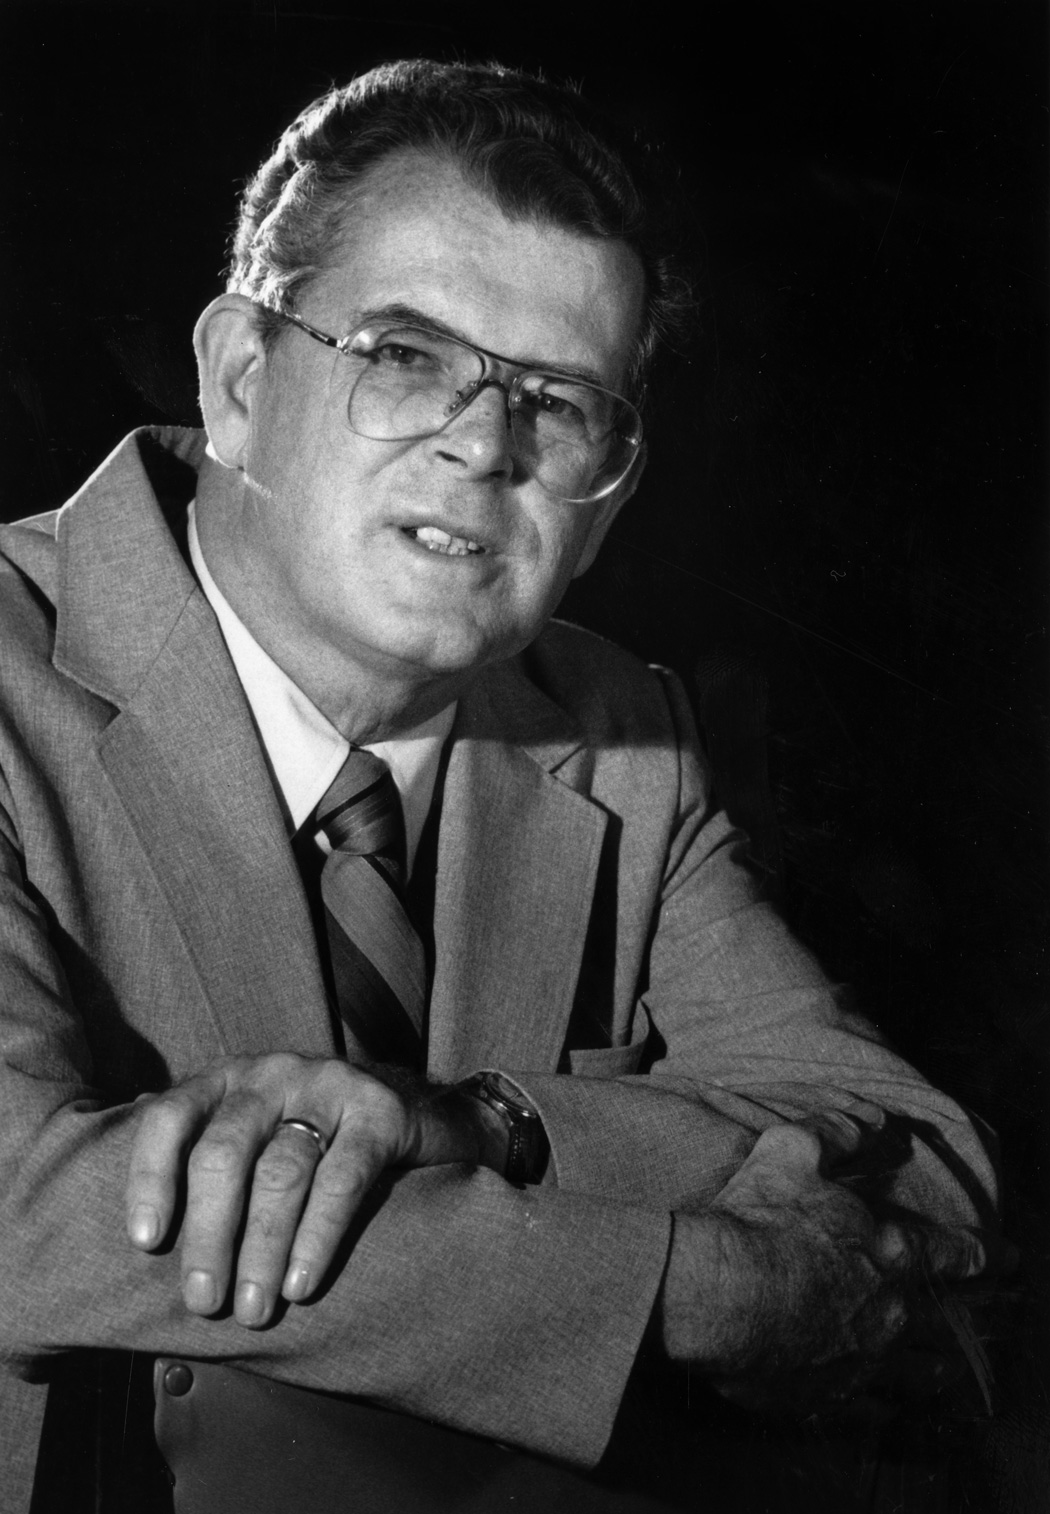 Richard Butwell was named the third president of the university on July 10, 1984. A scholar of Southeast Asia, Butwell came from the University of South Dakota. In early 1987, Butwell died of a heart attack at the age of 57